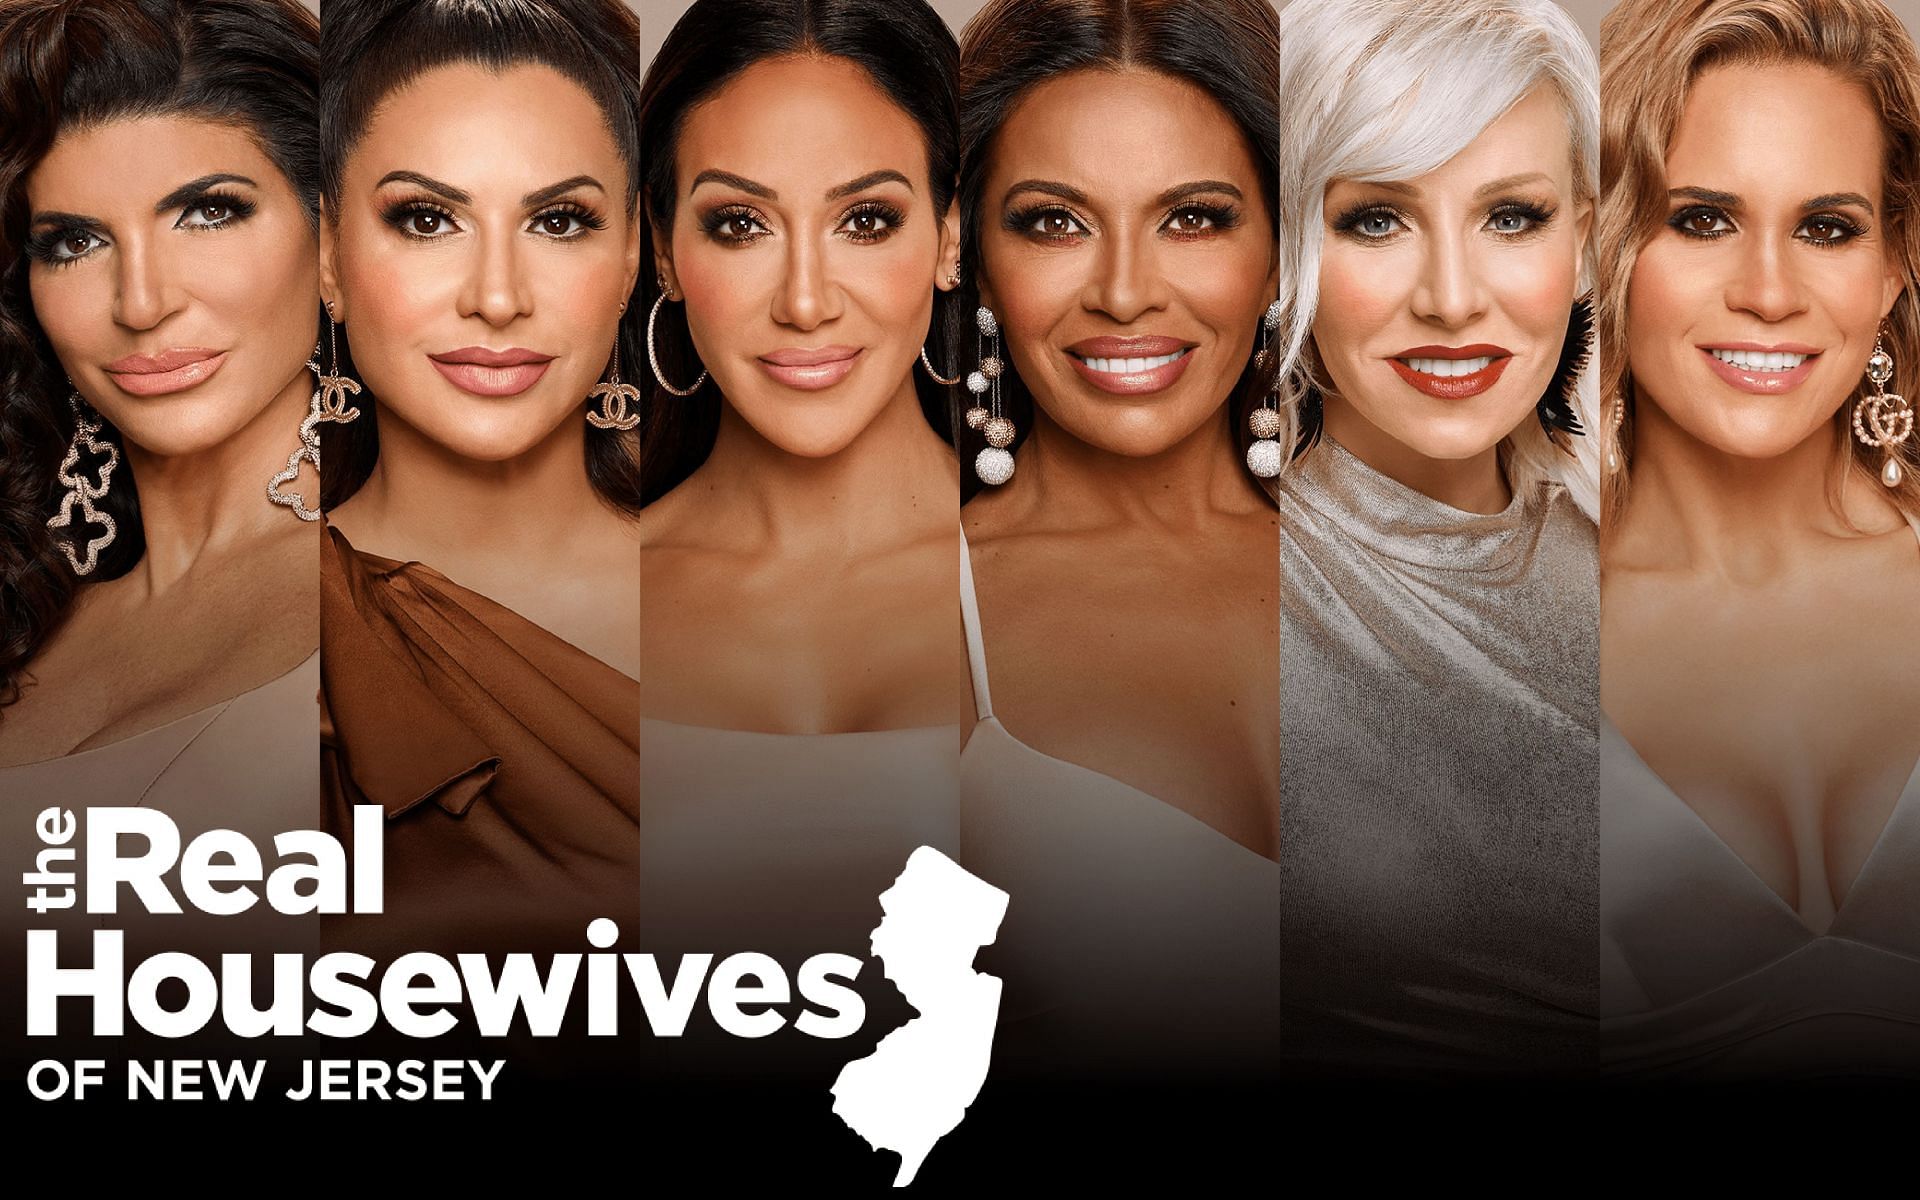 The Real Housewives of New Jersey&#039; cast list (Image via Bravo)